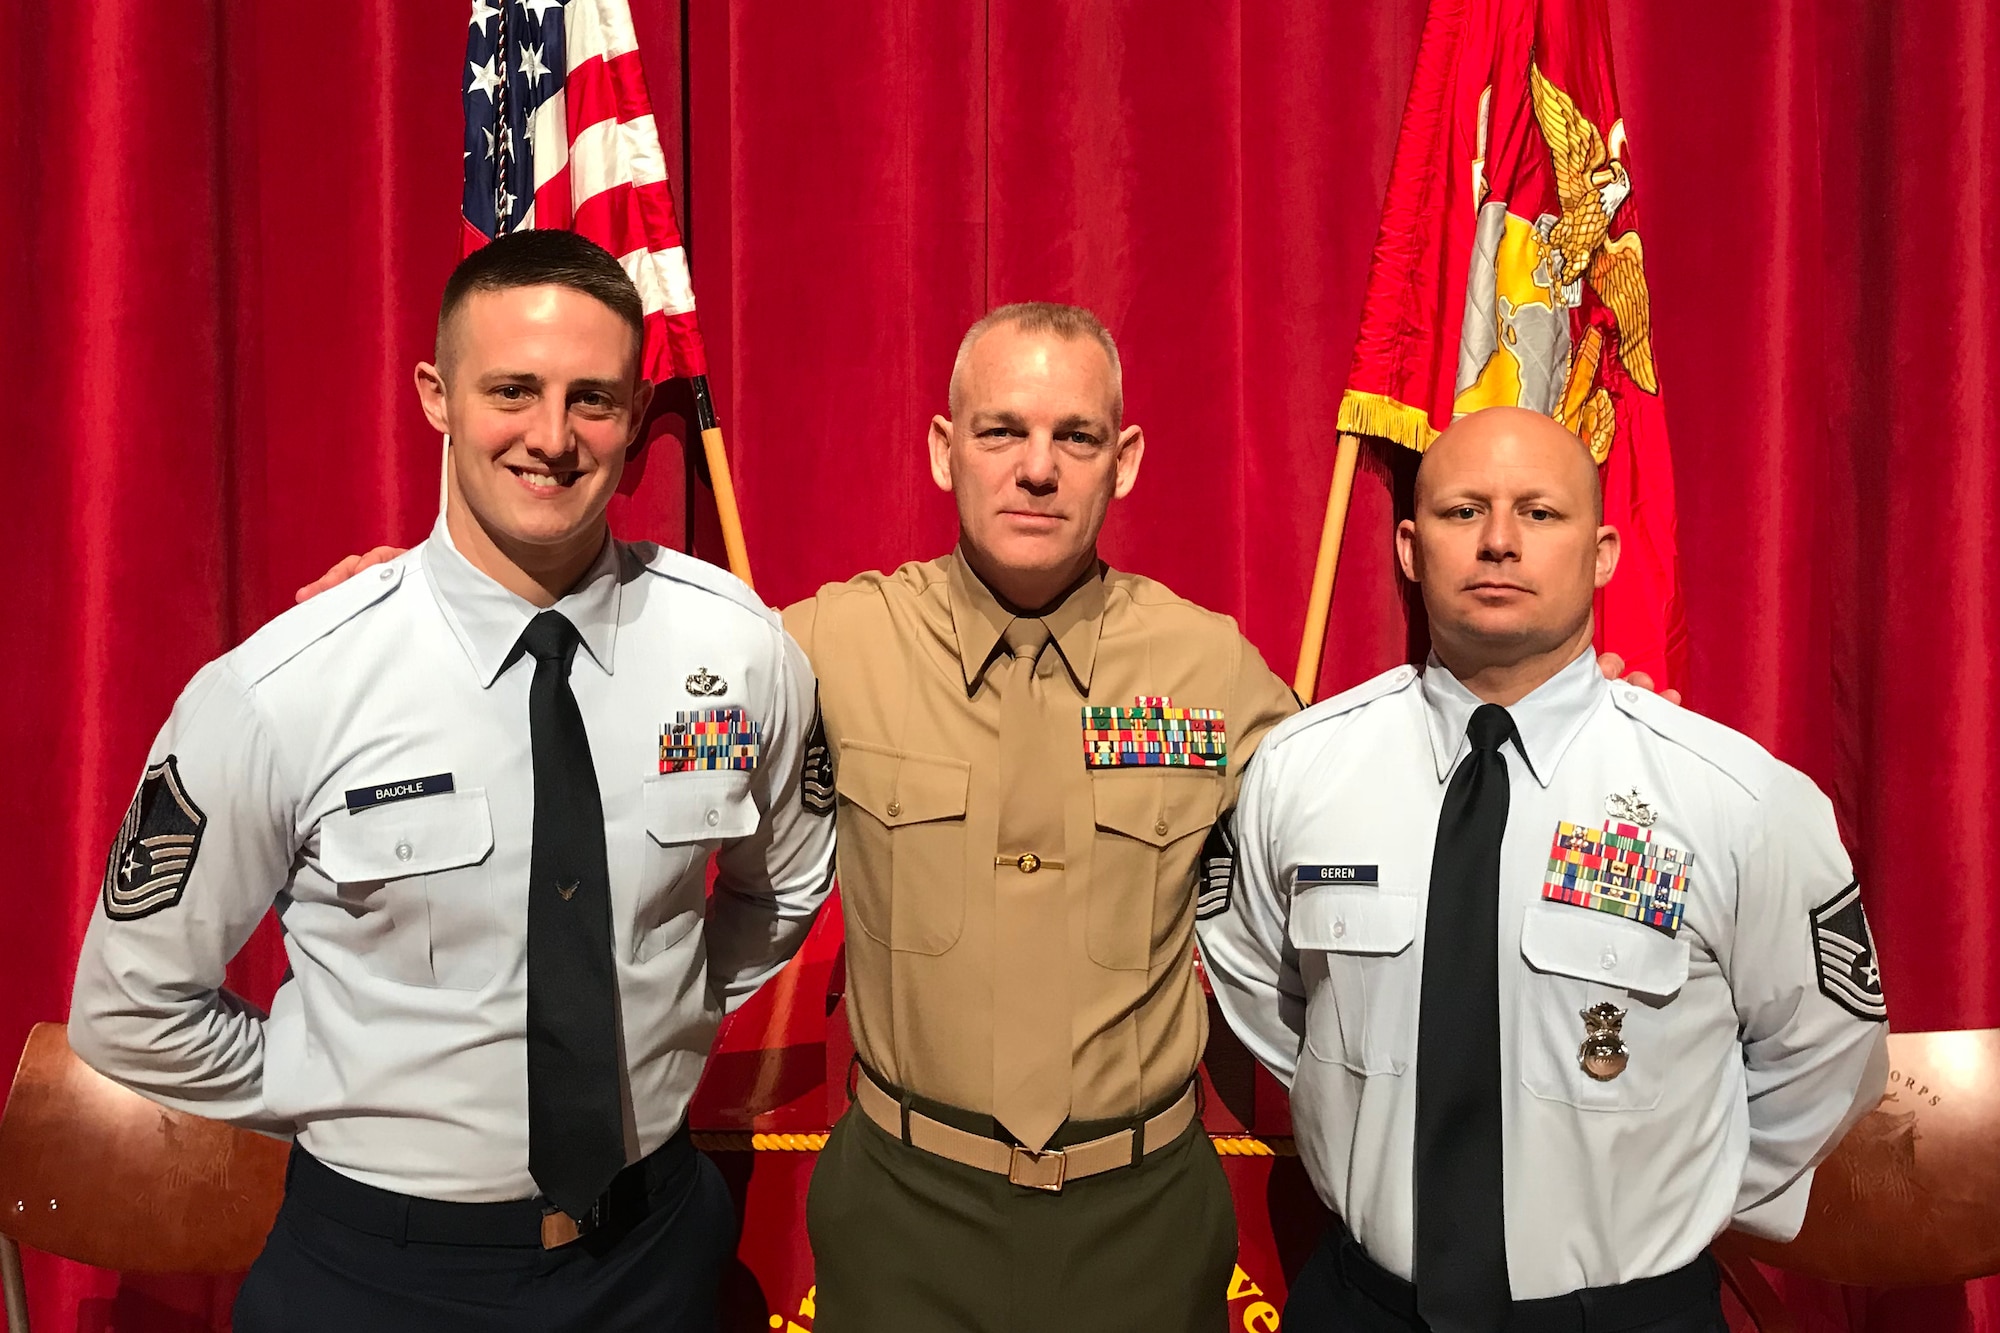 Master Sgt. Christopher Bauchle, 434th Civil Engineering Squadron assistant fire chief, poses with an unnamed Marine and Airmen following graduation from the Marine Staff NCO advanced course at Camp Lejeune, North Carolina recently. Bauchle improved his chances of attending the course by researching the school beforehand and tailoring his application to the qualities the school valued most. (U.S. Air Force/courtesy photo)